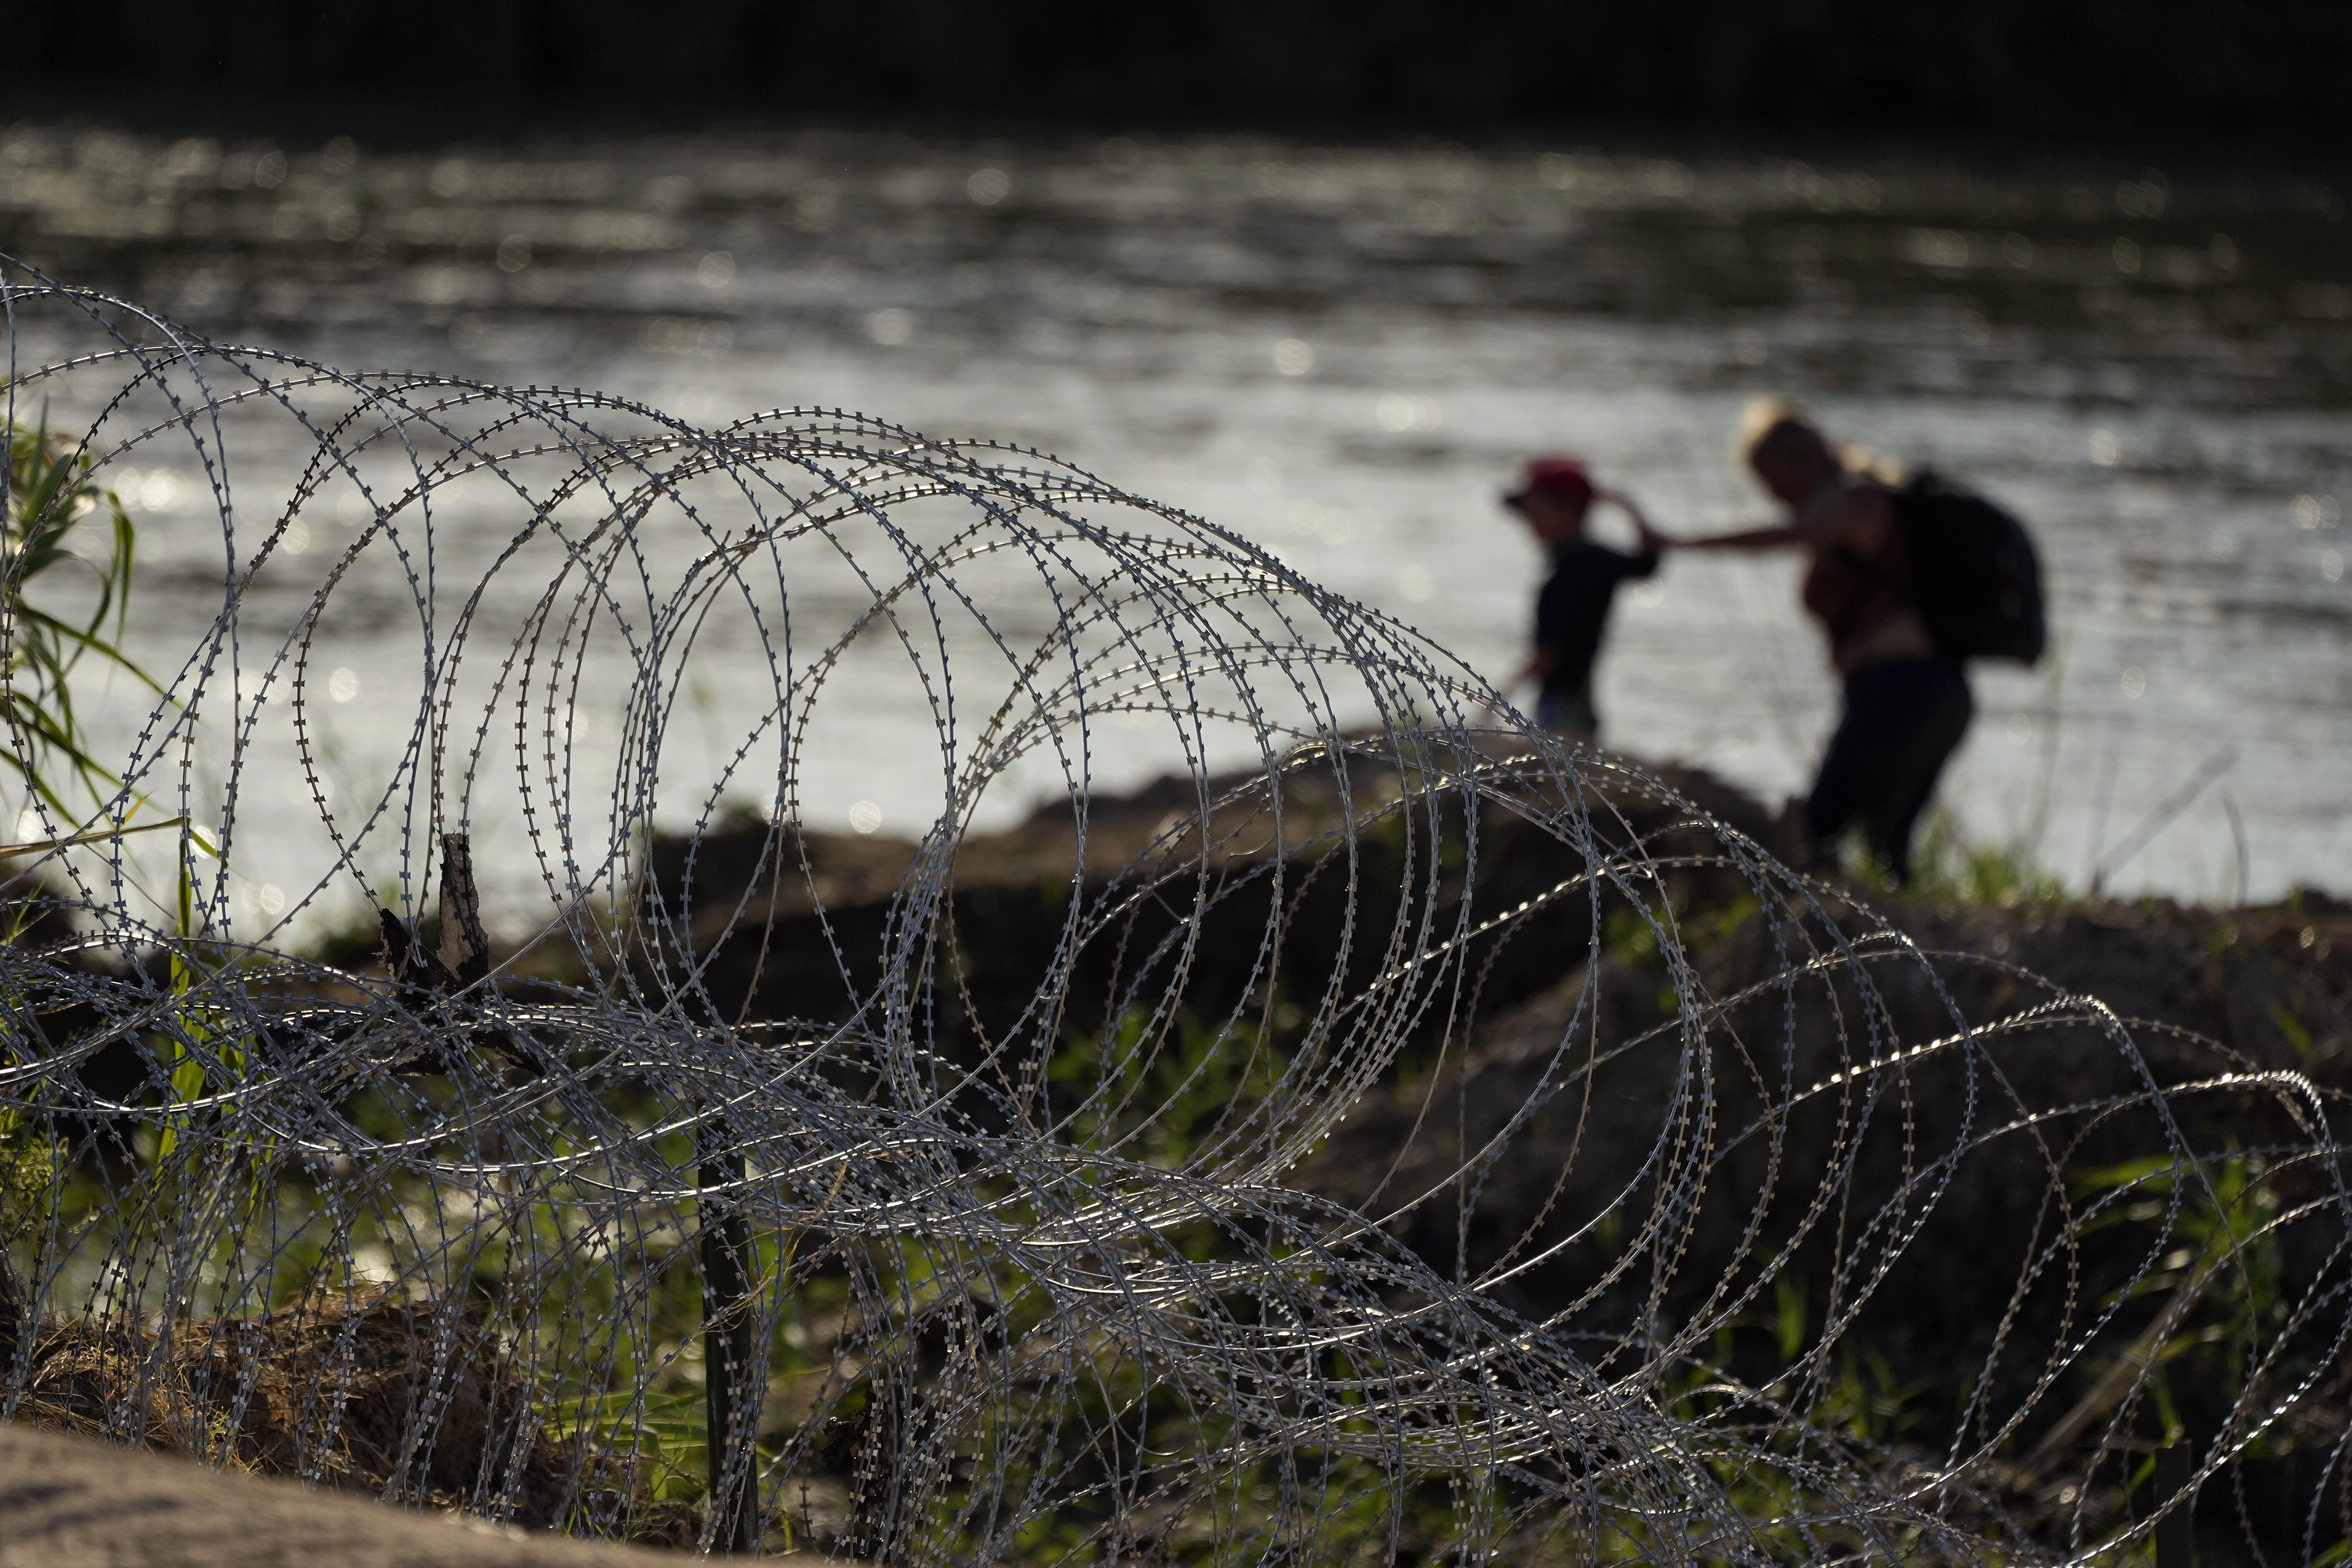 Migrants walk along concertina wire as they try to cross the Rio Grande at the Texas-Mexico border ...